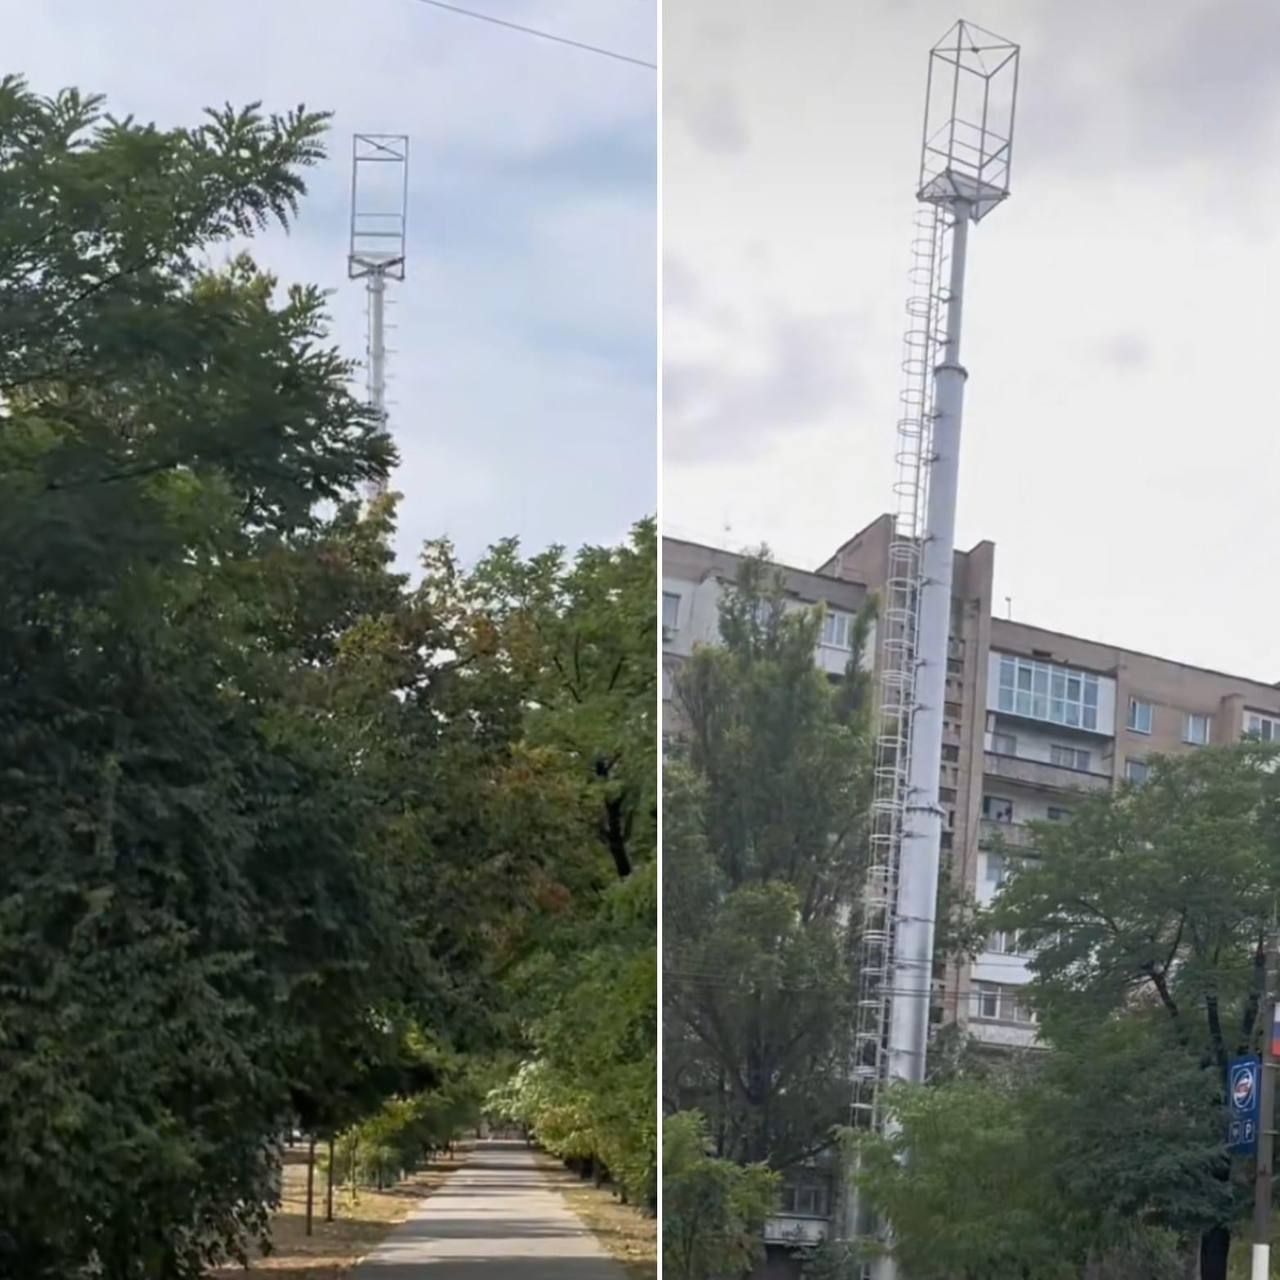 Exiled mayor: Russia building cell towers in occupied Melitopol to eavesdrop on residents